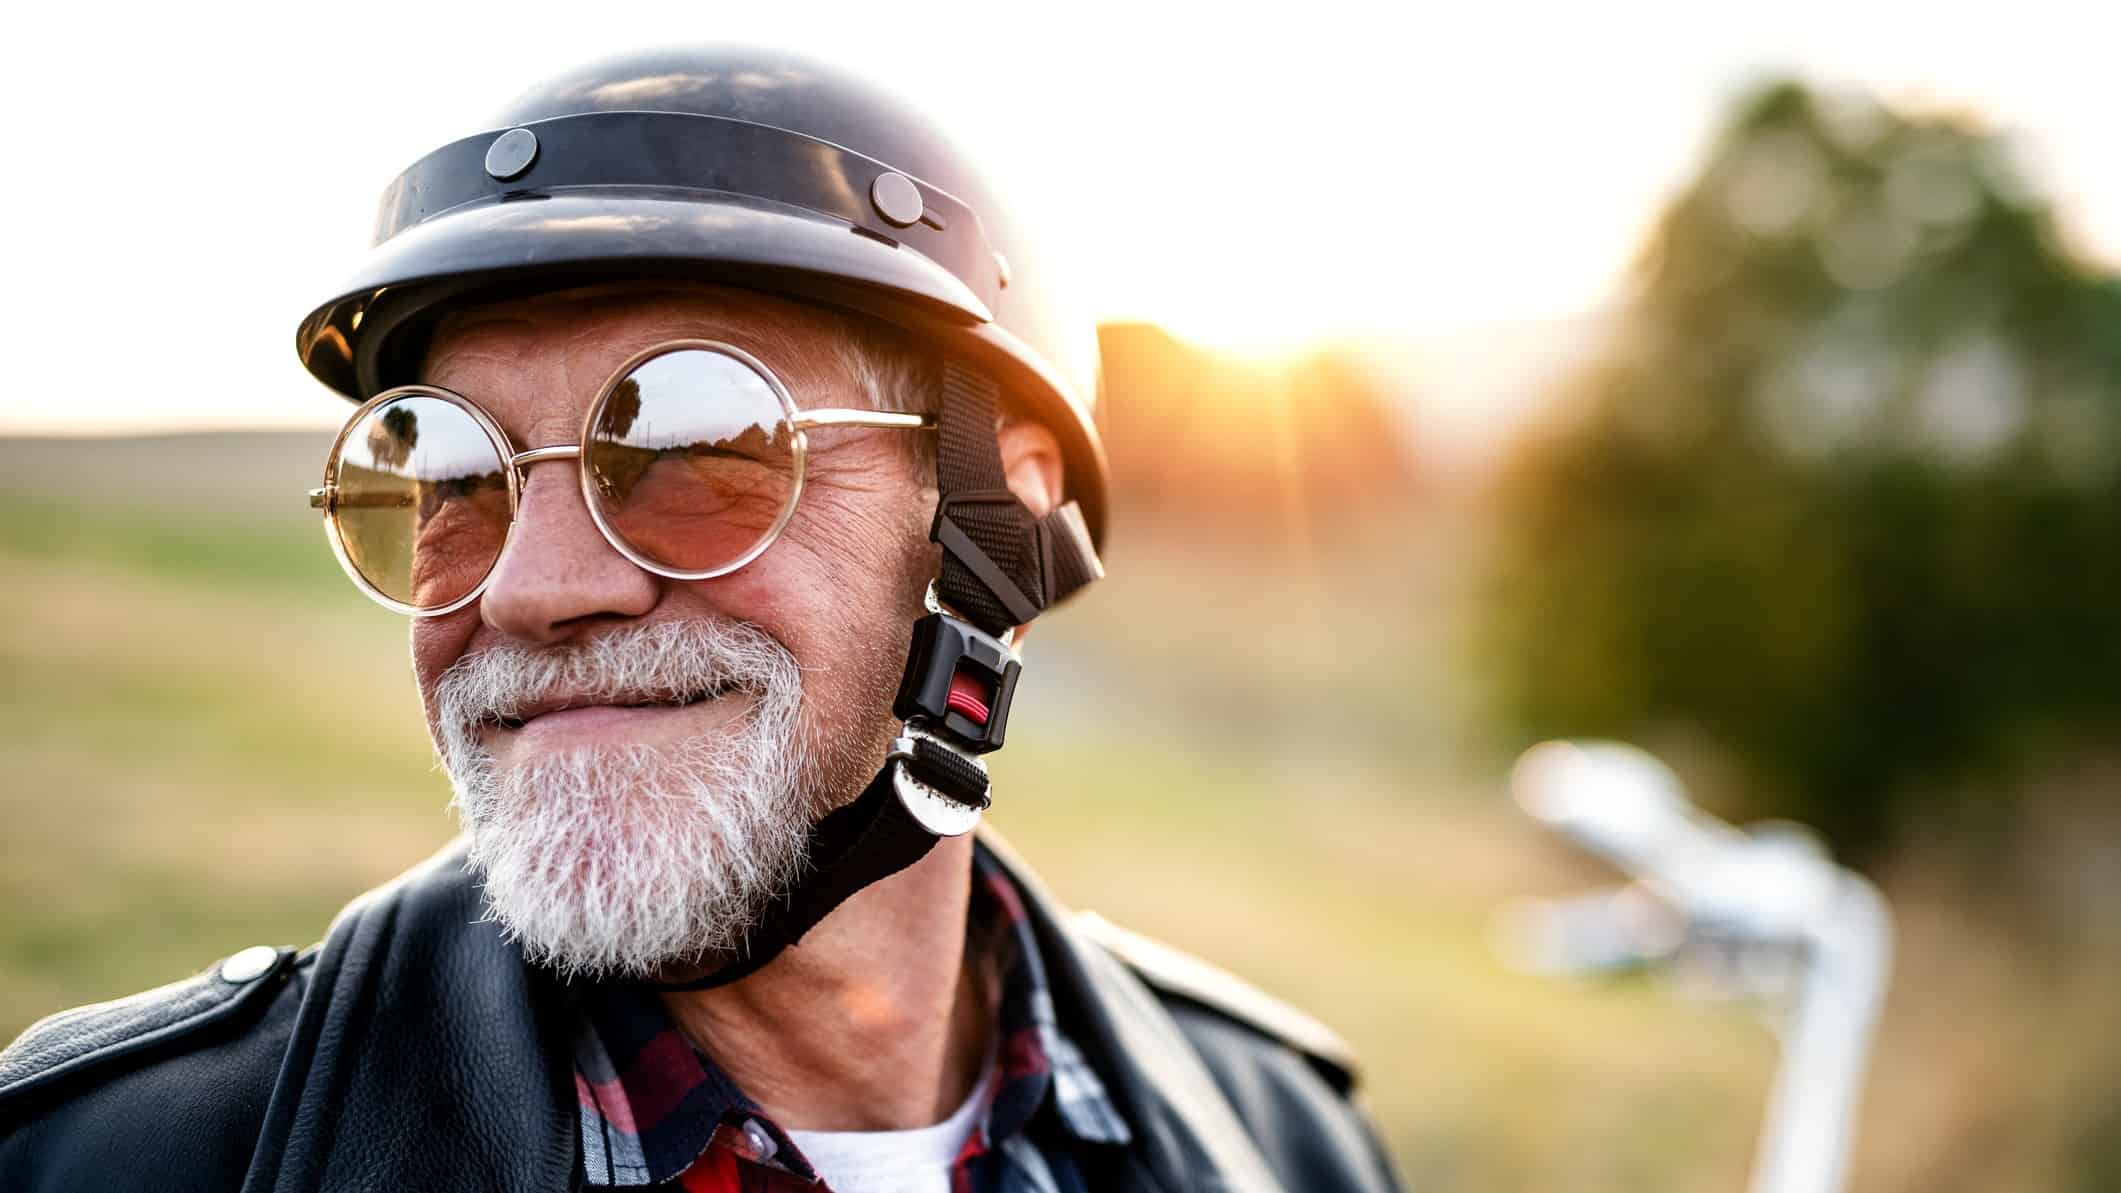 An older man wearing a helmet is set to ride his motorbike into the sunset, making the most of his retirement.